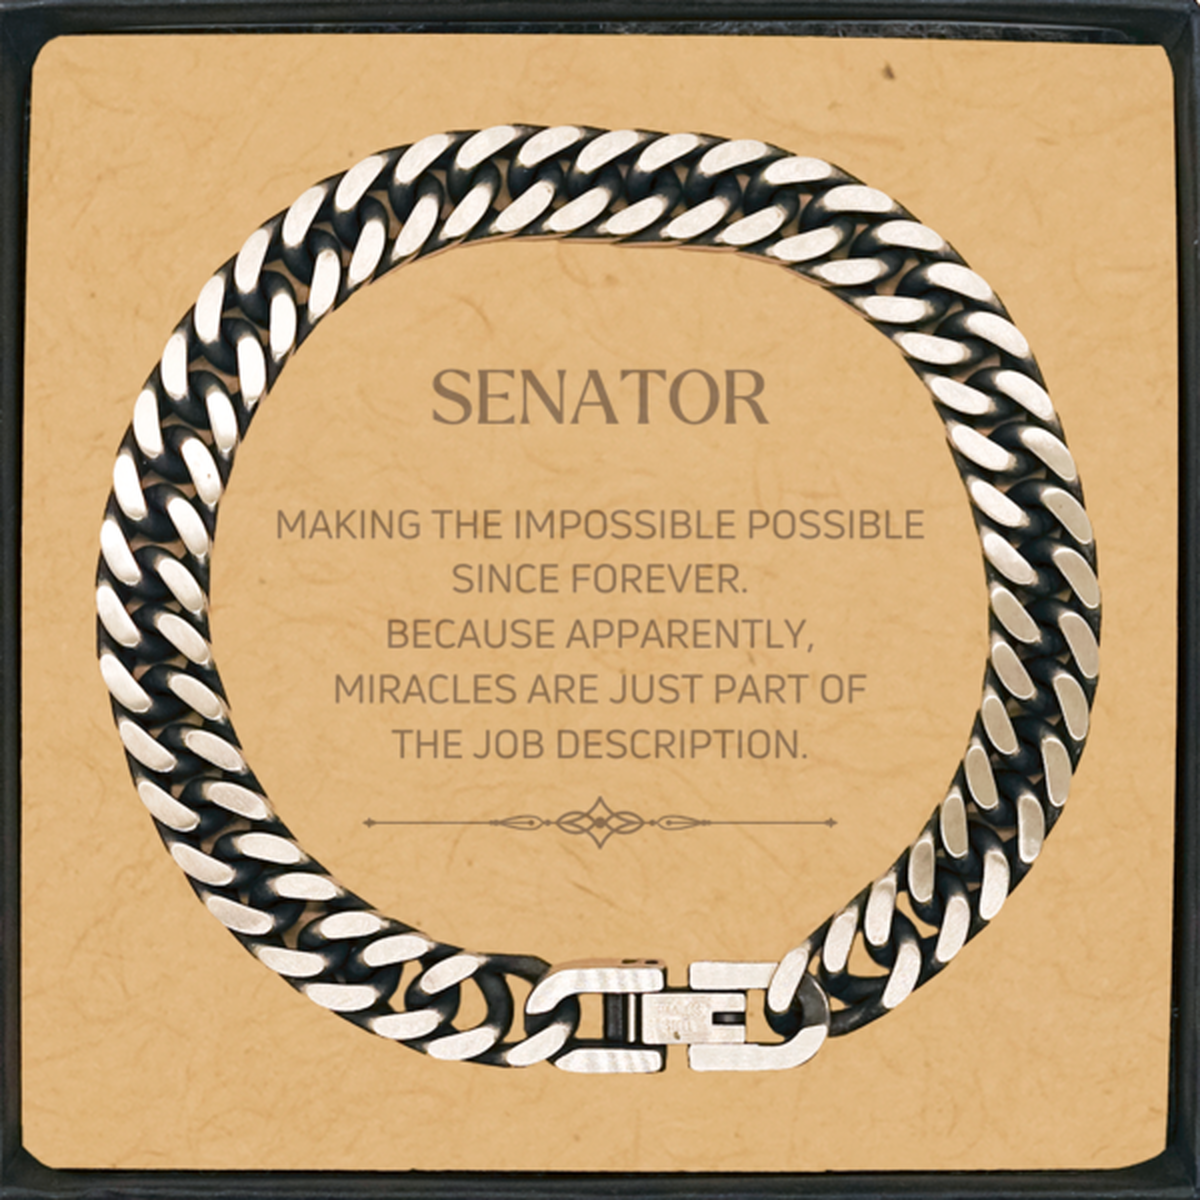 Funny Senator Gifts, Miracles are just part of the job description, Inspirational Birthday Cuban Link Chain Bracelet For Senator, Men, Women, Coworkers, Friends, Boss